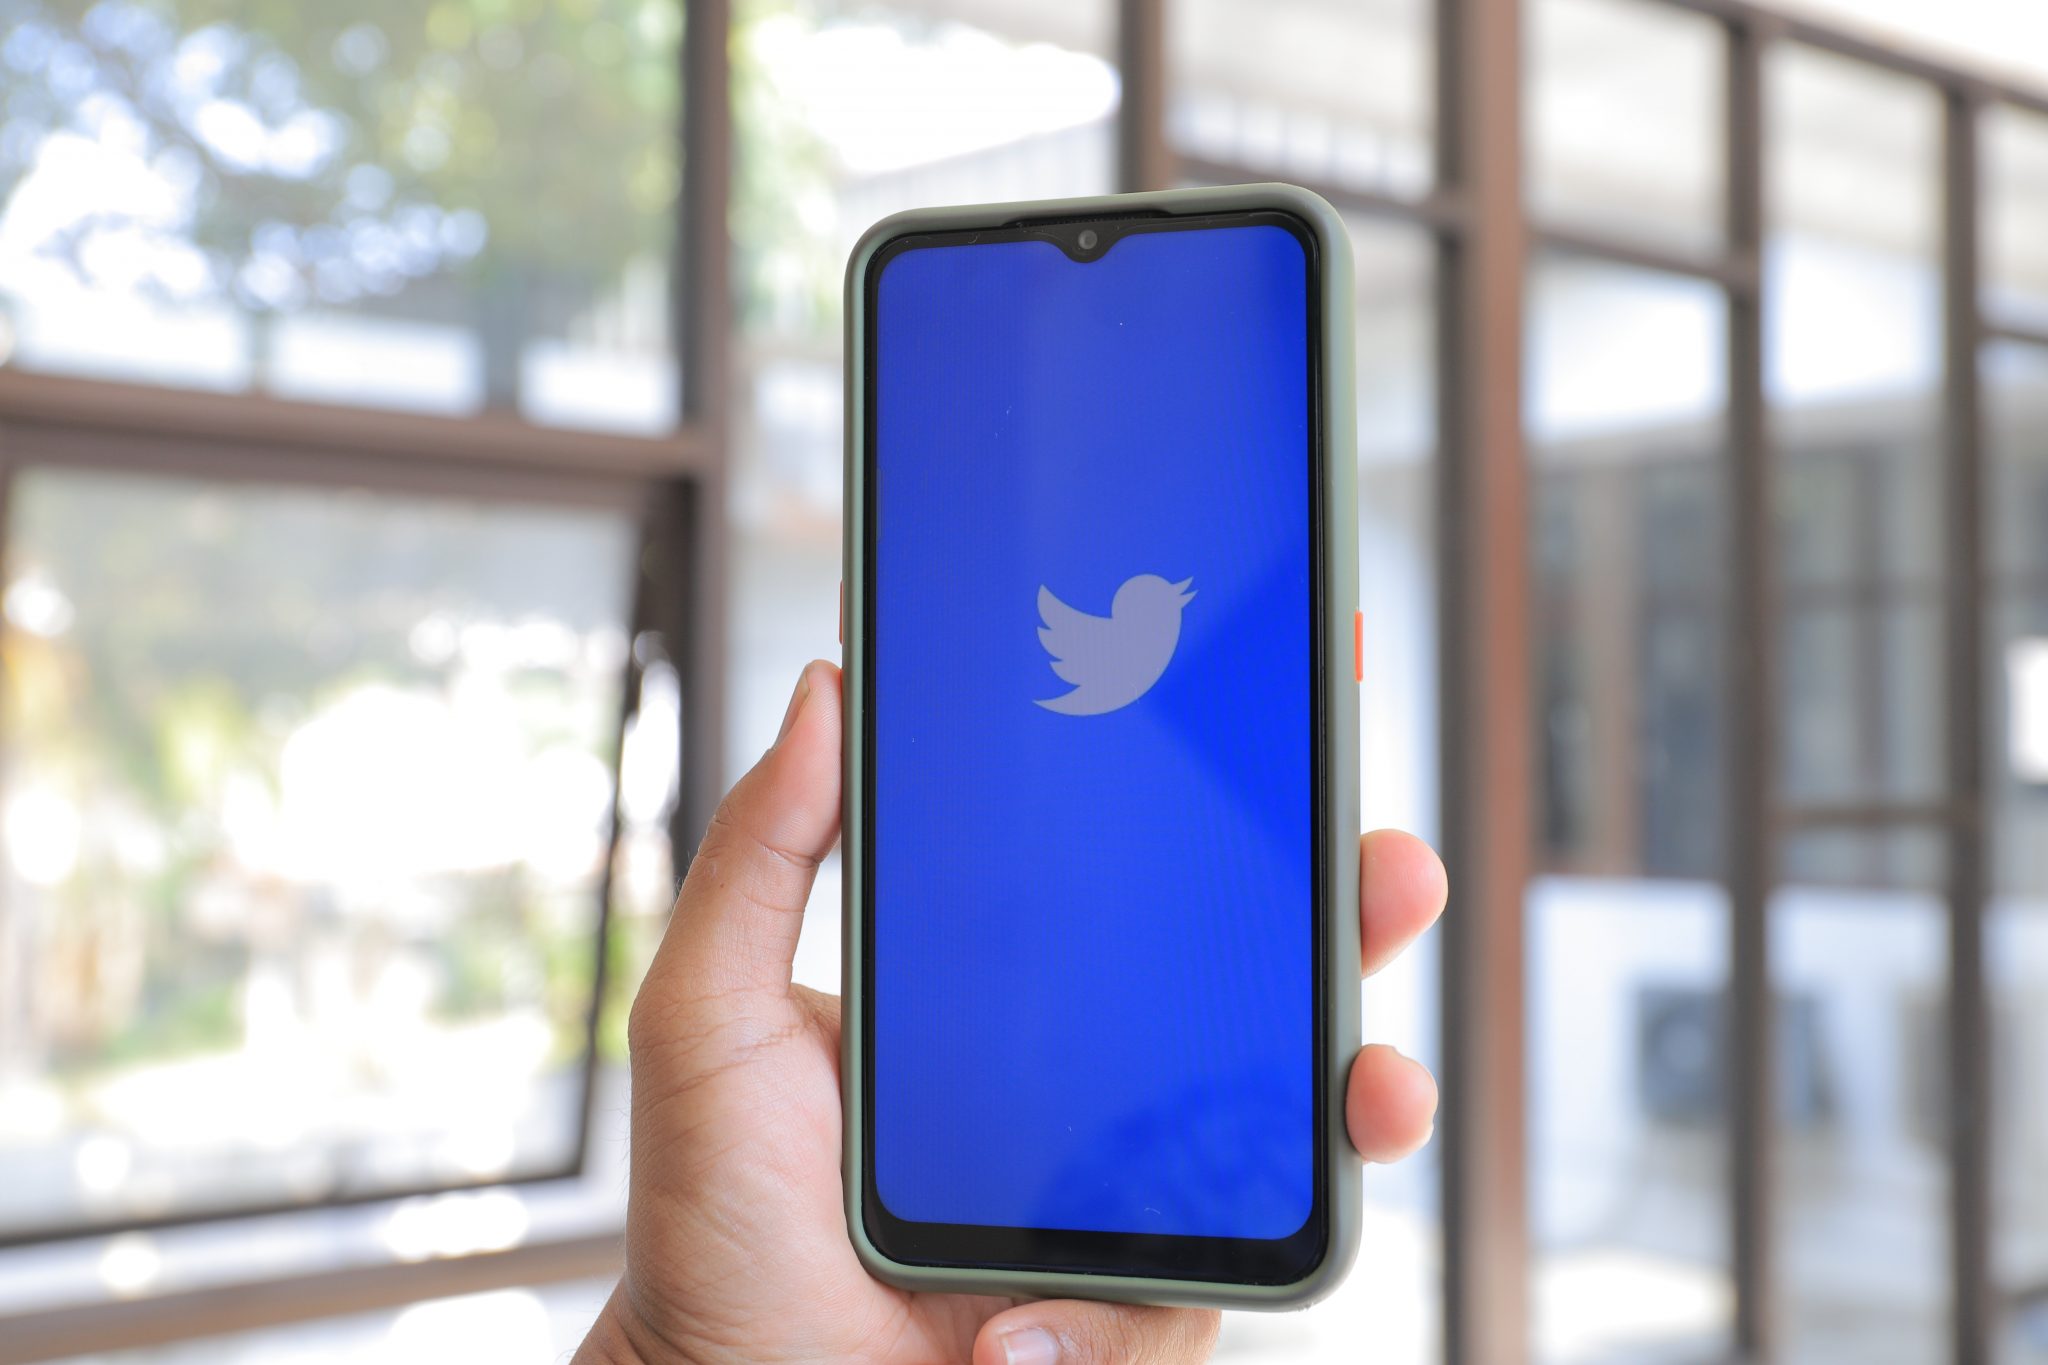 Photo of phone with Twitter logo on screen